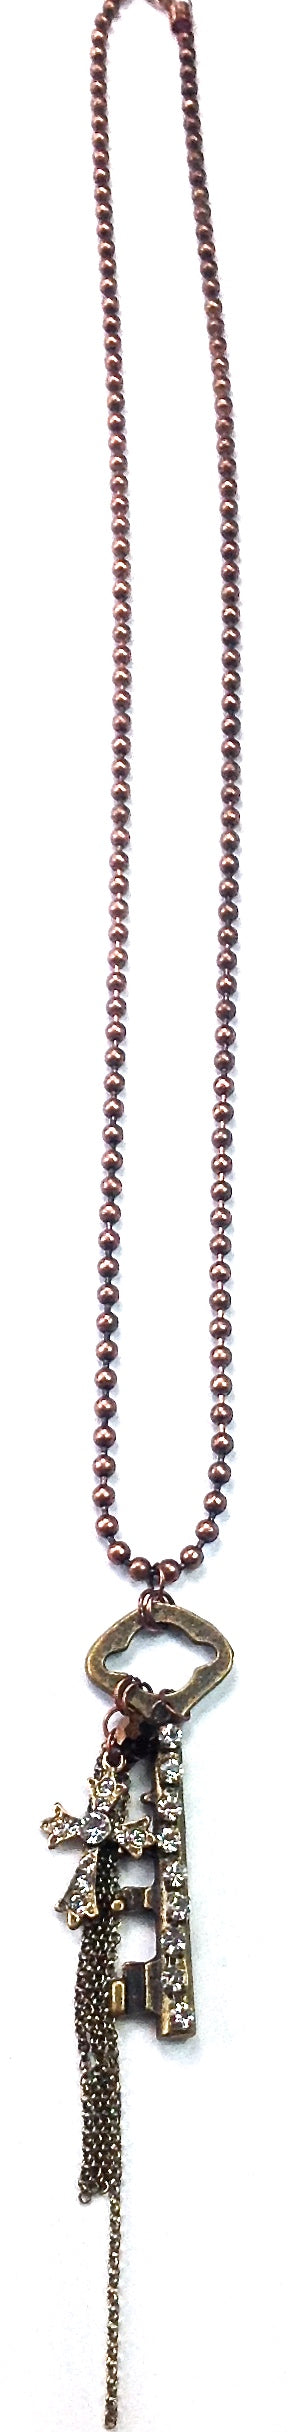 Copper Bead Chain with Key Cluster Pendant